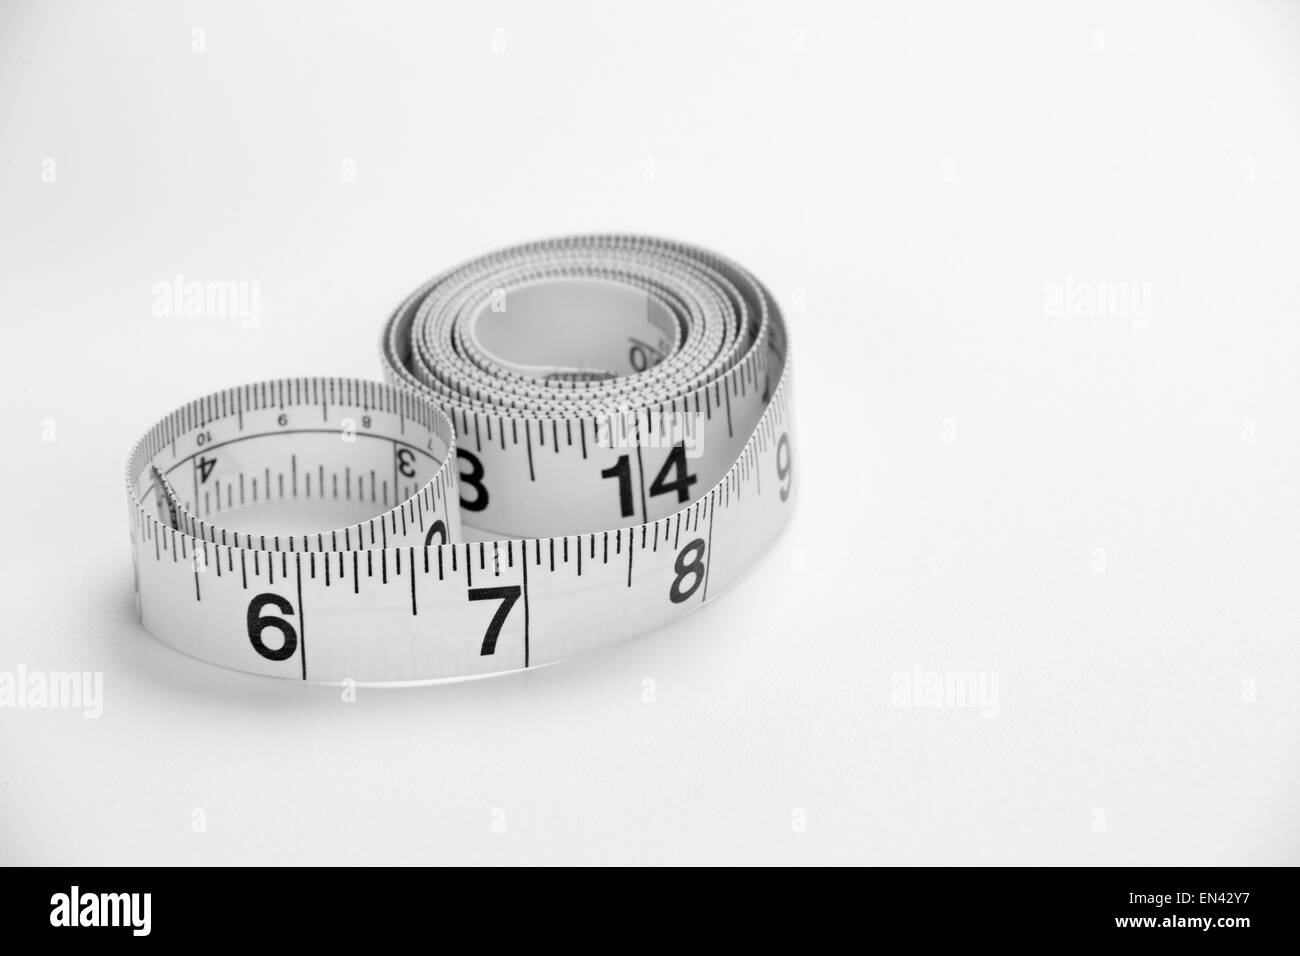 A tape measure on a white background Stock Photo